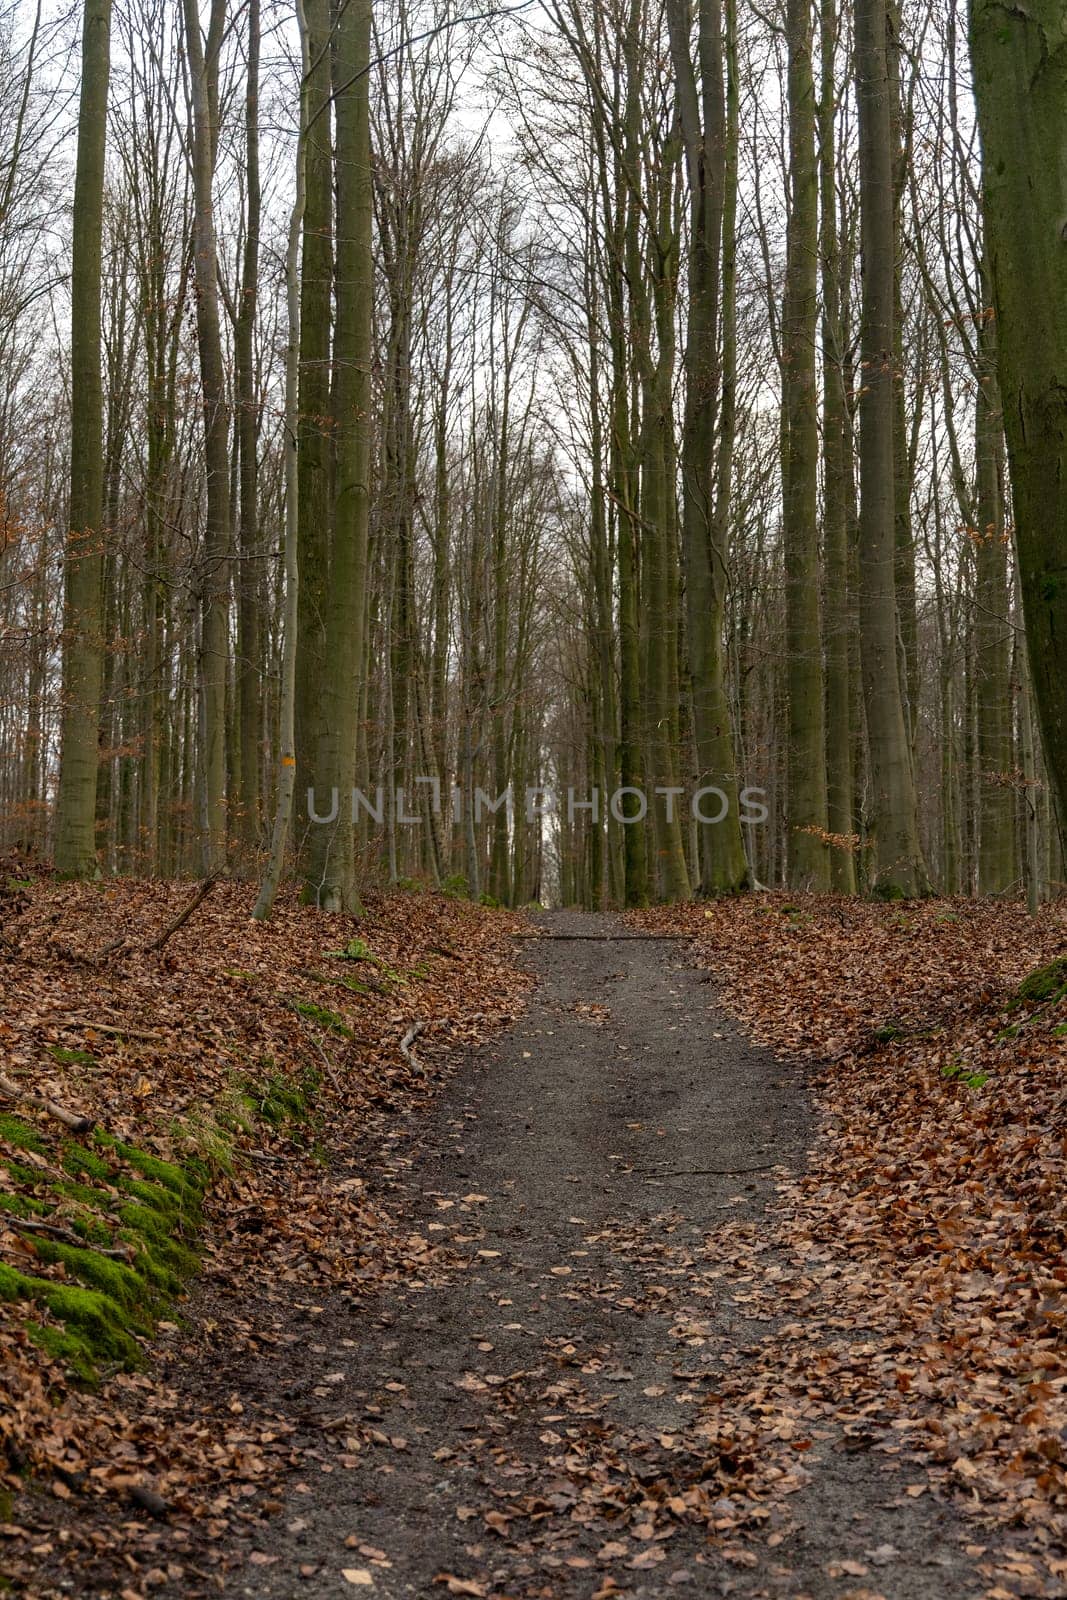 A scenic view of a pathway in a forest on an autumn day